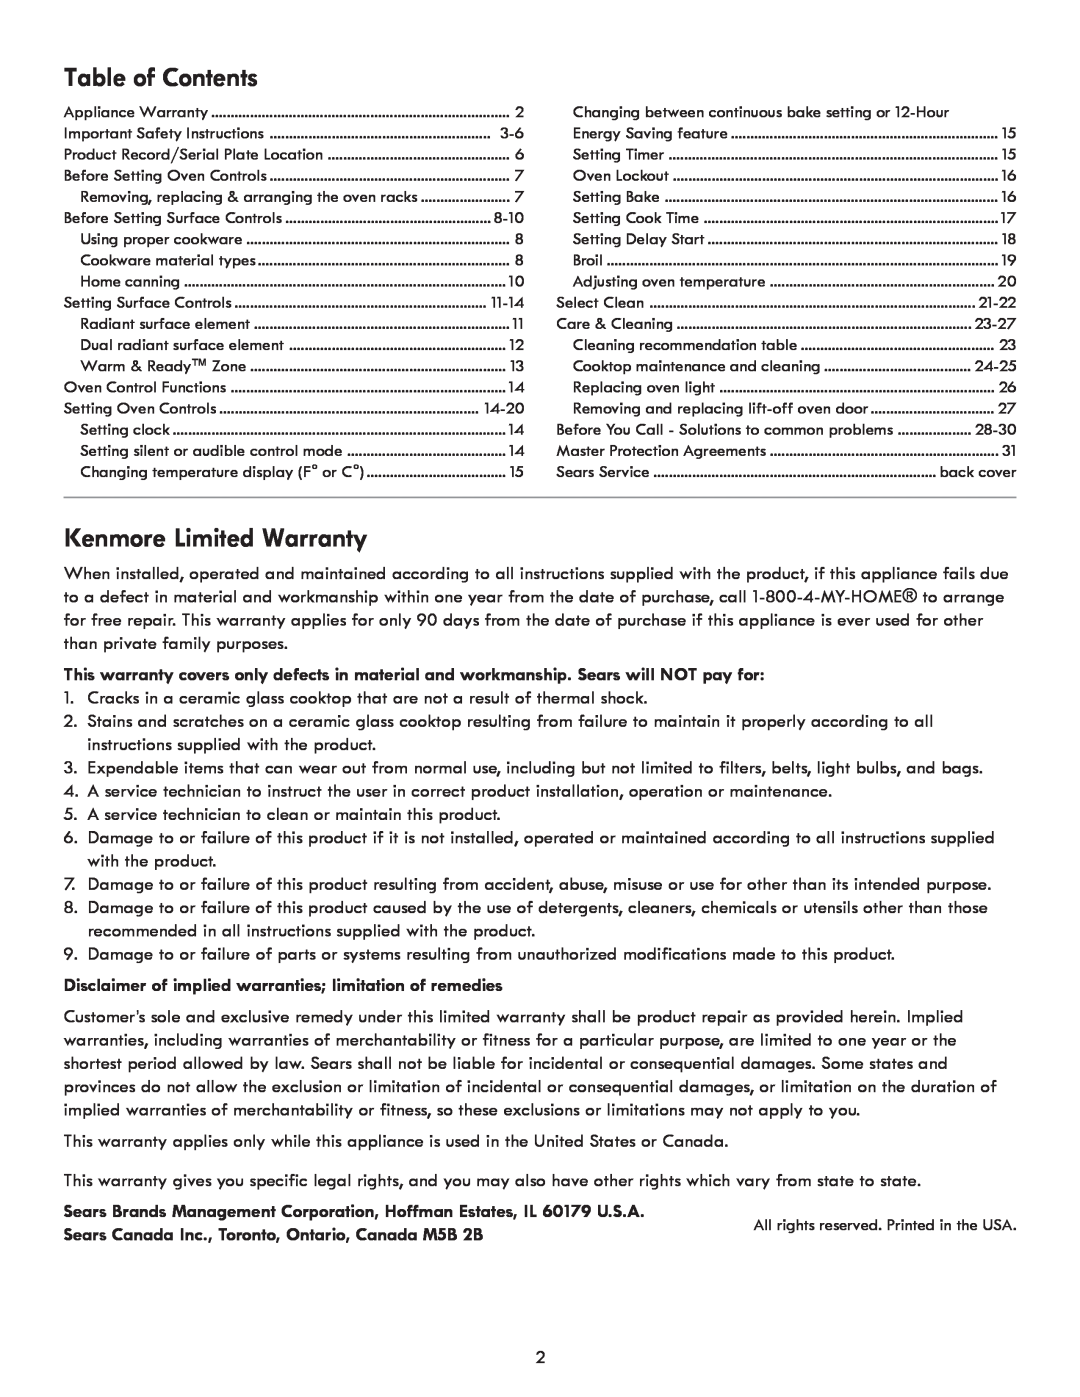 Kenmore 790.921 manual Table of Contents, Kenmore Limited Warranty, Disclaimer of implied warranties limitation of remedies 